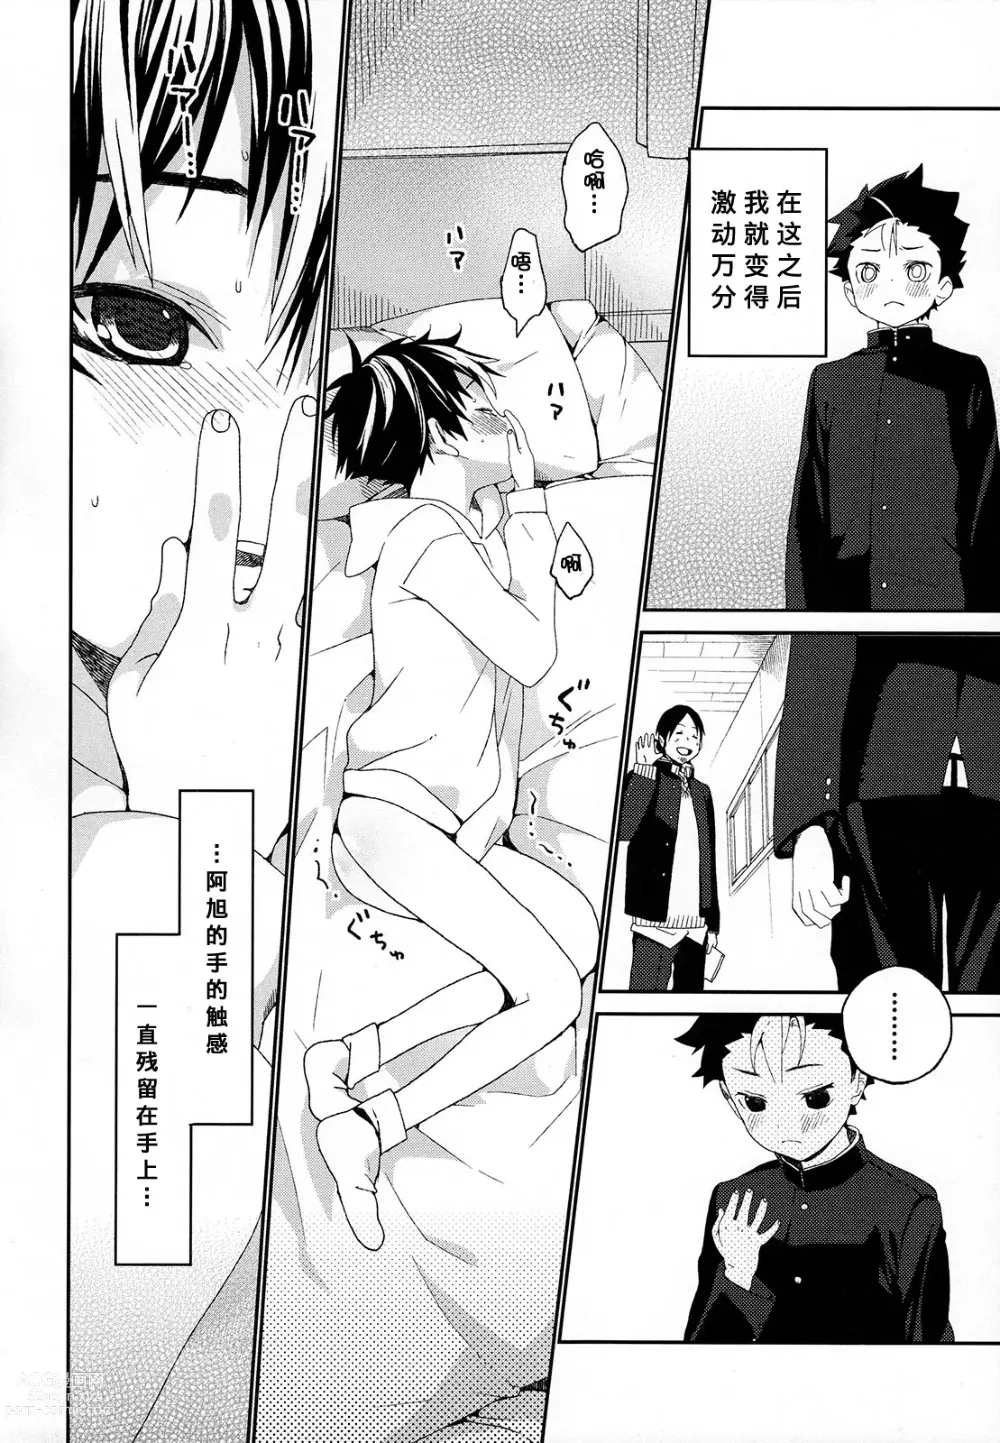 Page 28 of doujinshi 西谷君的发情期